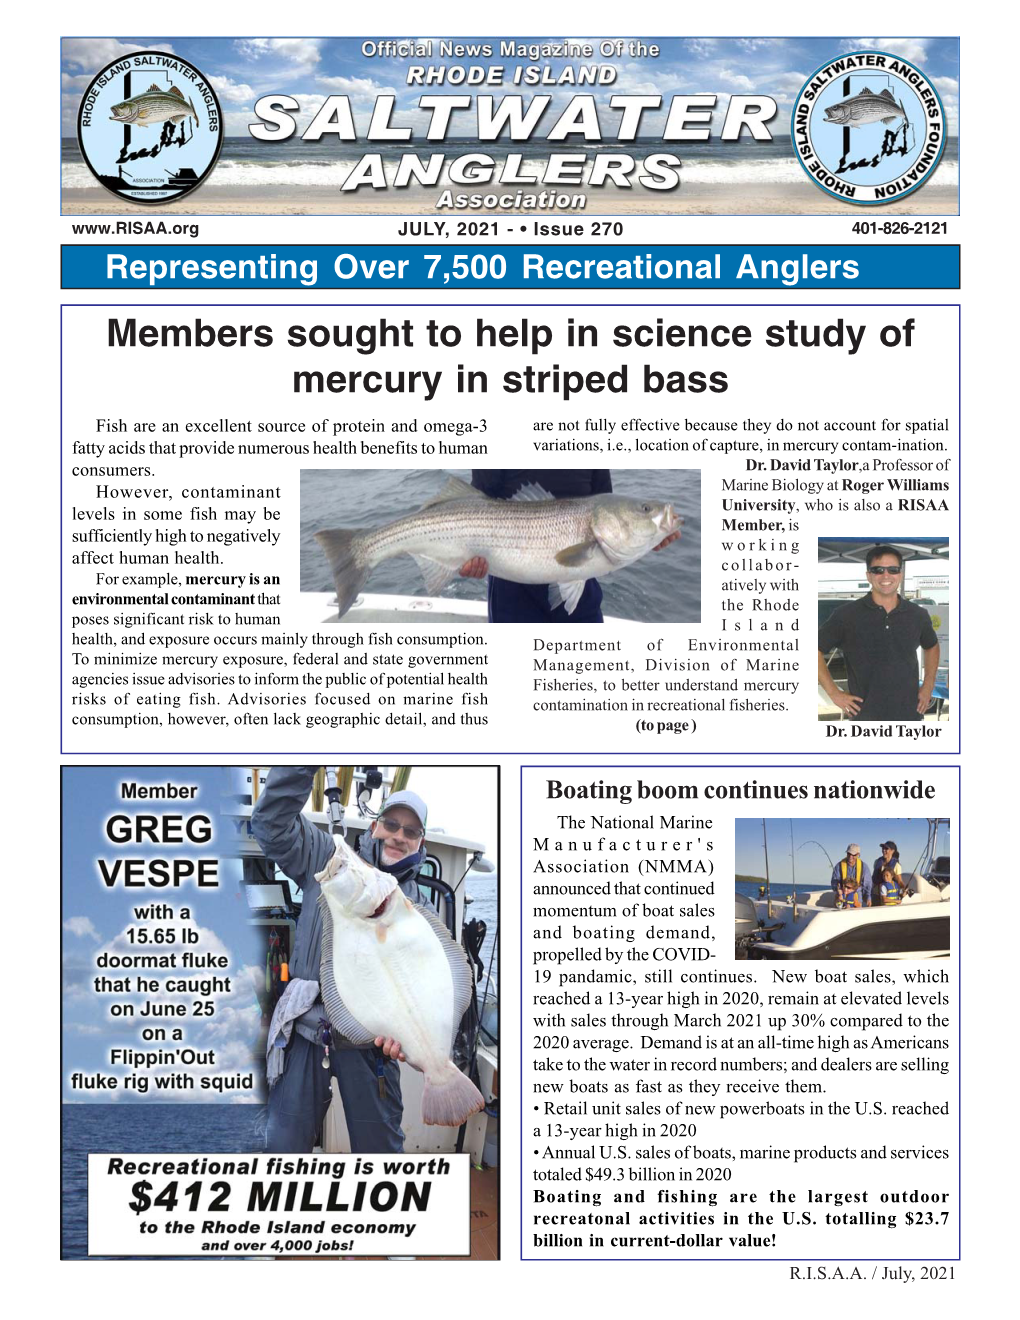 Members Sought to Help in Science Study of Mercury in Striped Bass